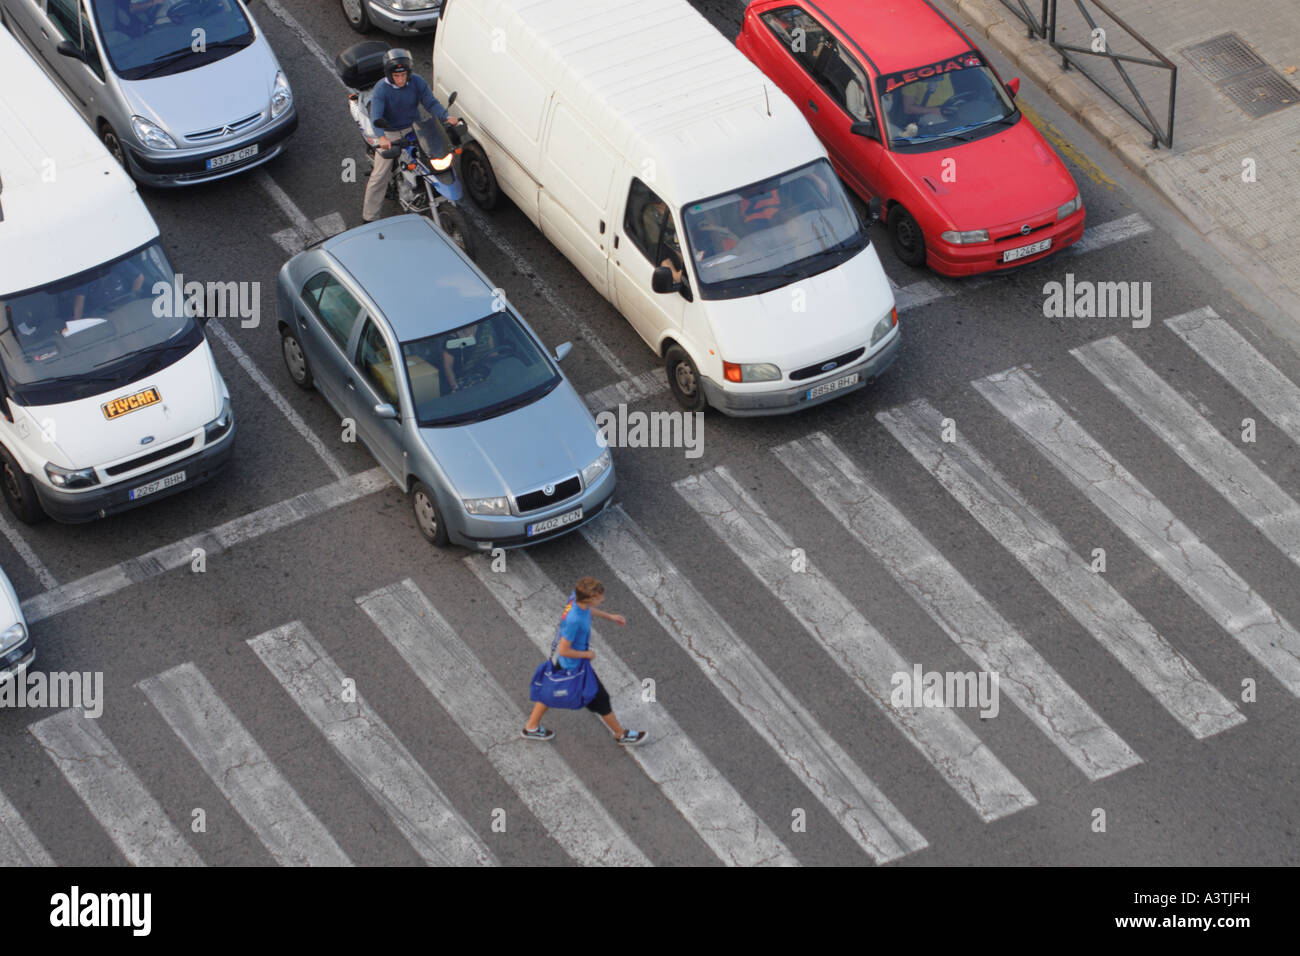 One pedestrian crossing busy road on zebra crossing with car traffic vehicles waiting Stock Photo